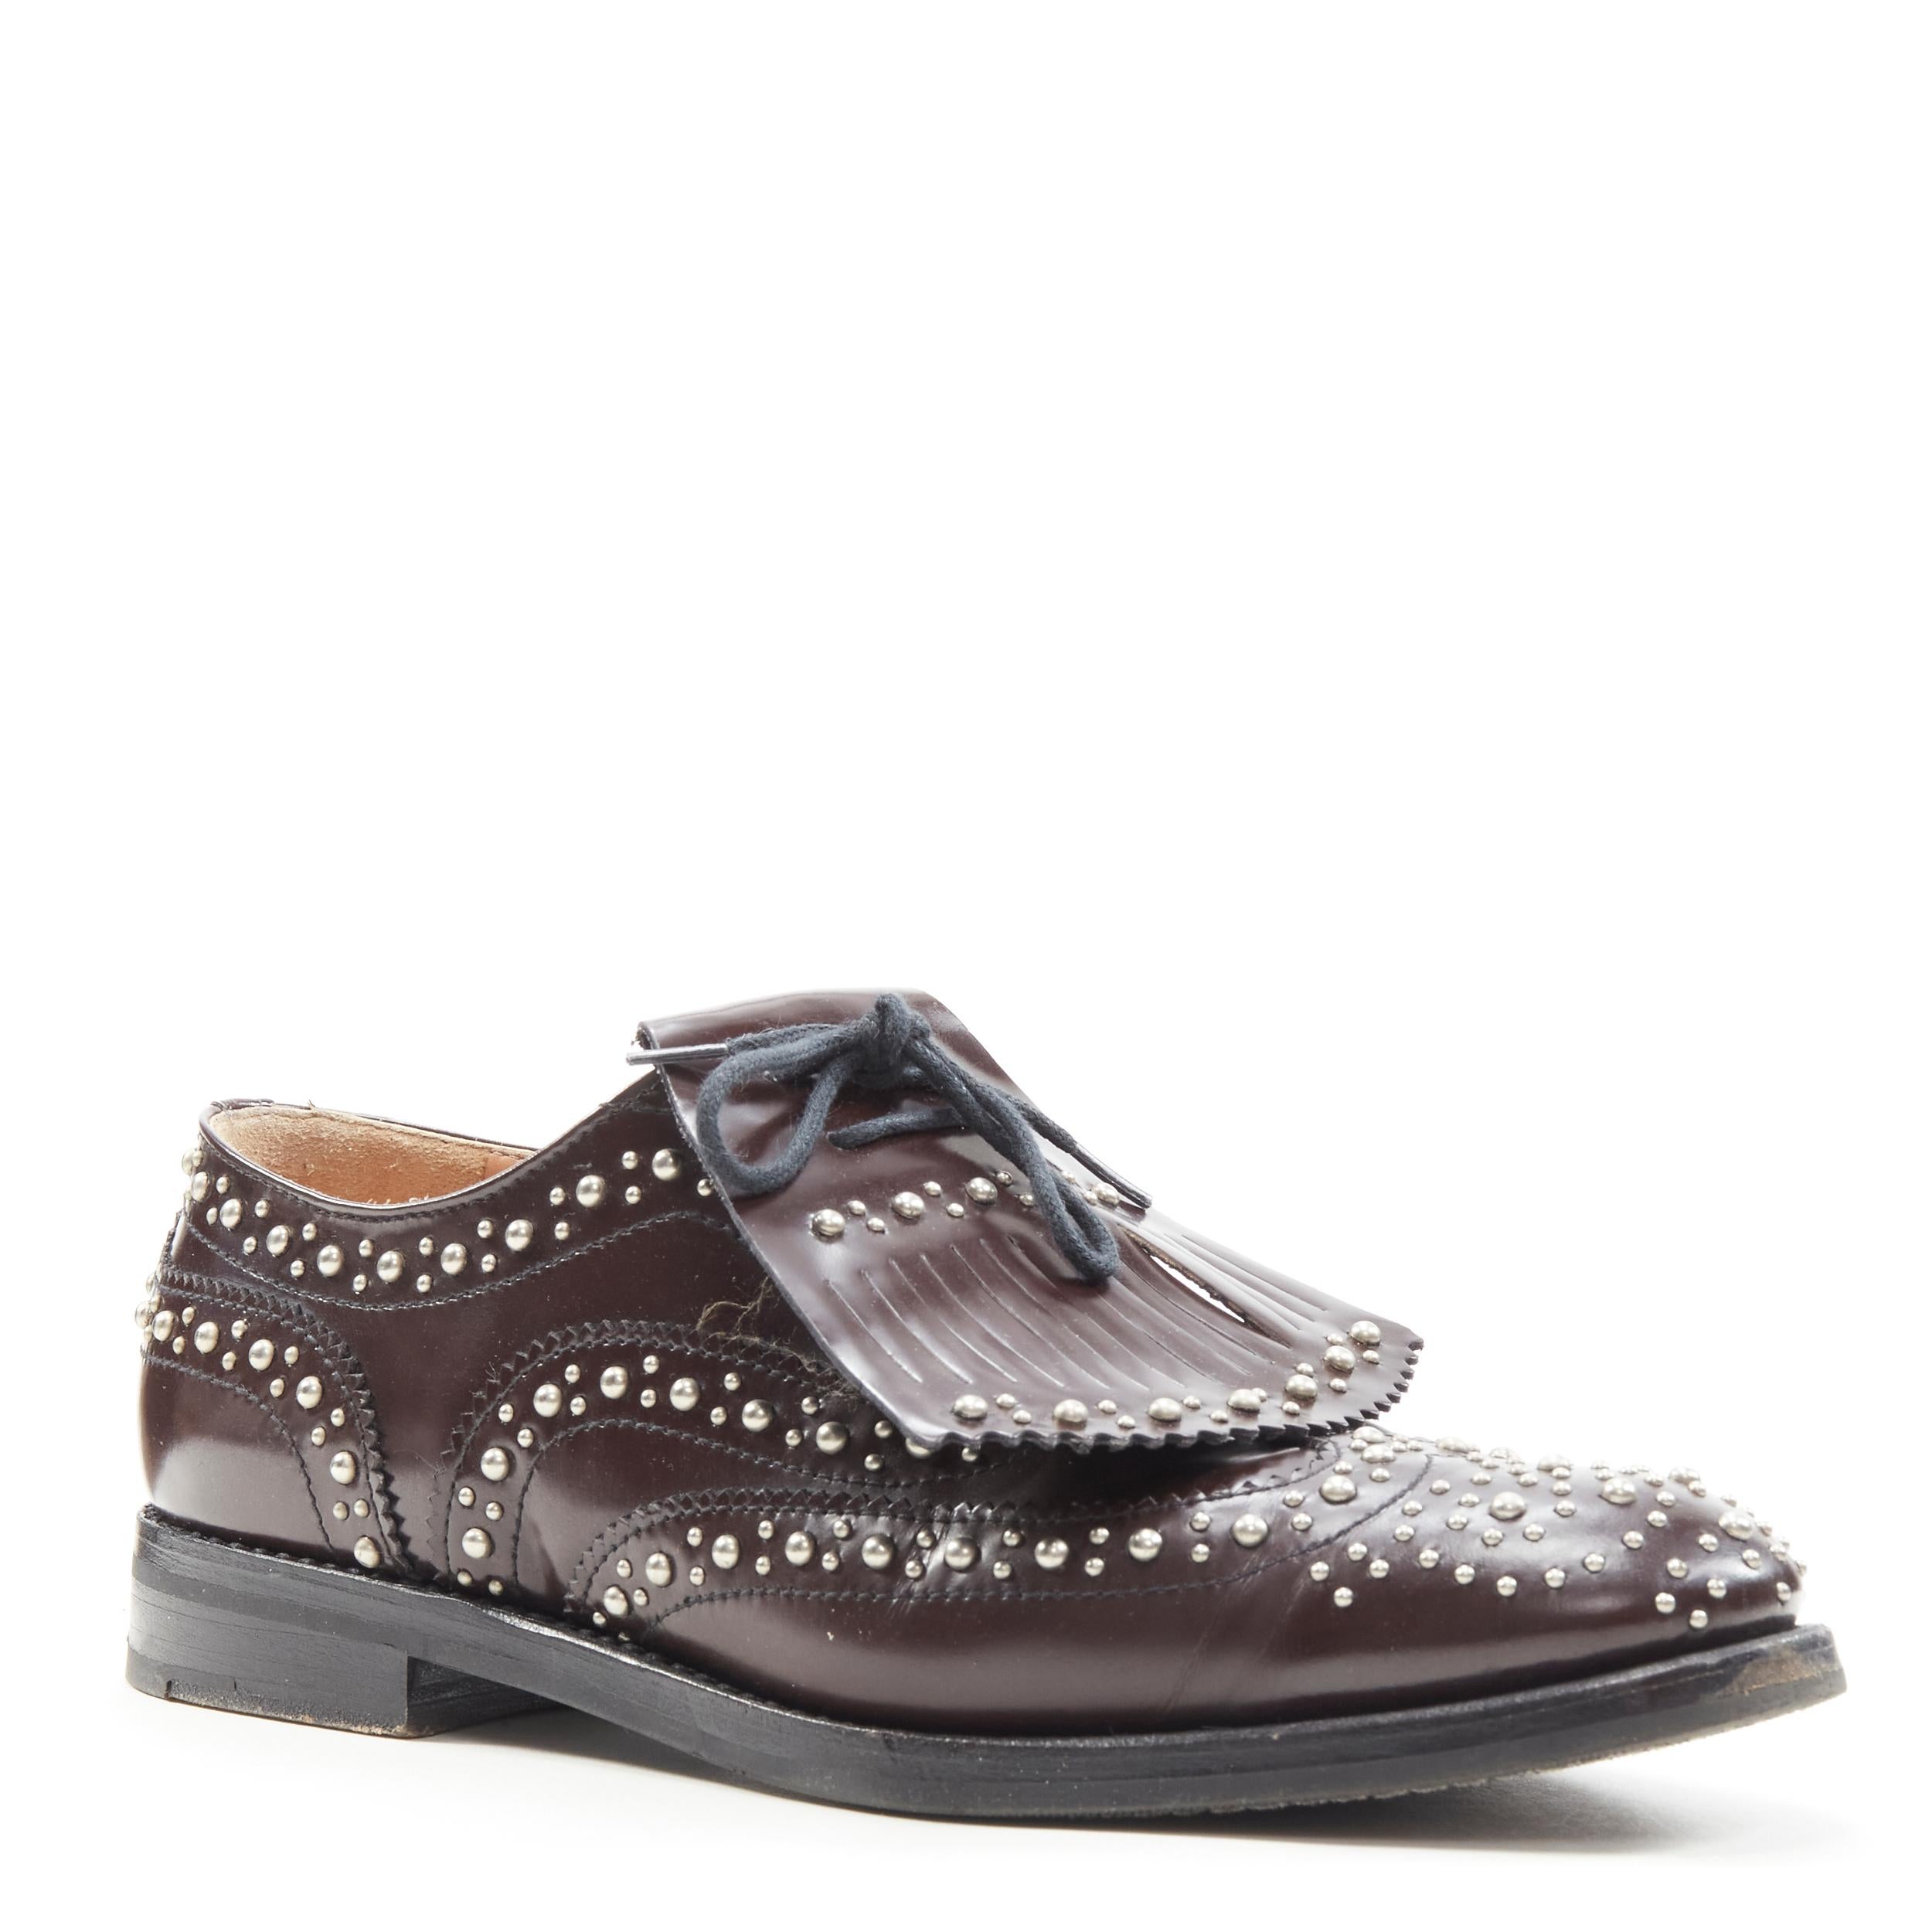 CHURCH'S Burwood Met Cordovan dark brown silver studded fringe brogue EU36 
Reference: ANWU/A00383 
Brand: Church's 
Model: Burwood 
Material: Leather 
Color: Brown 
Pattern: Solid 
Closure: Lace 
Extra Detail: Detachable fringe flap detail. 
Made